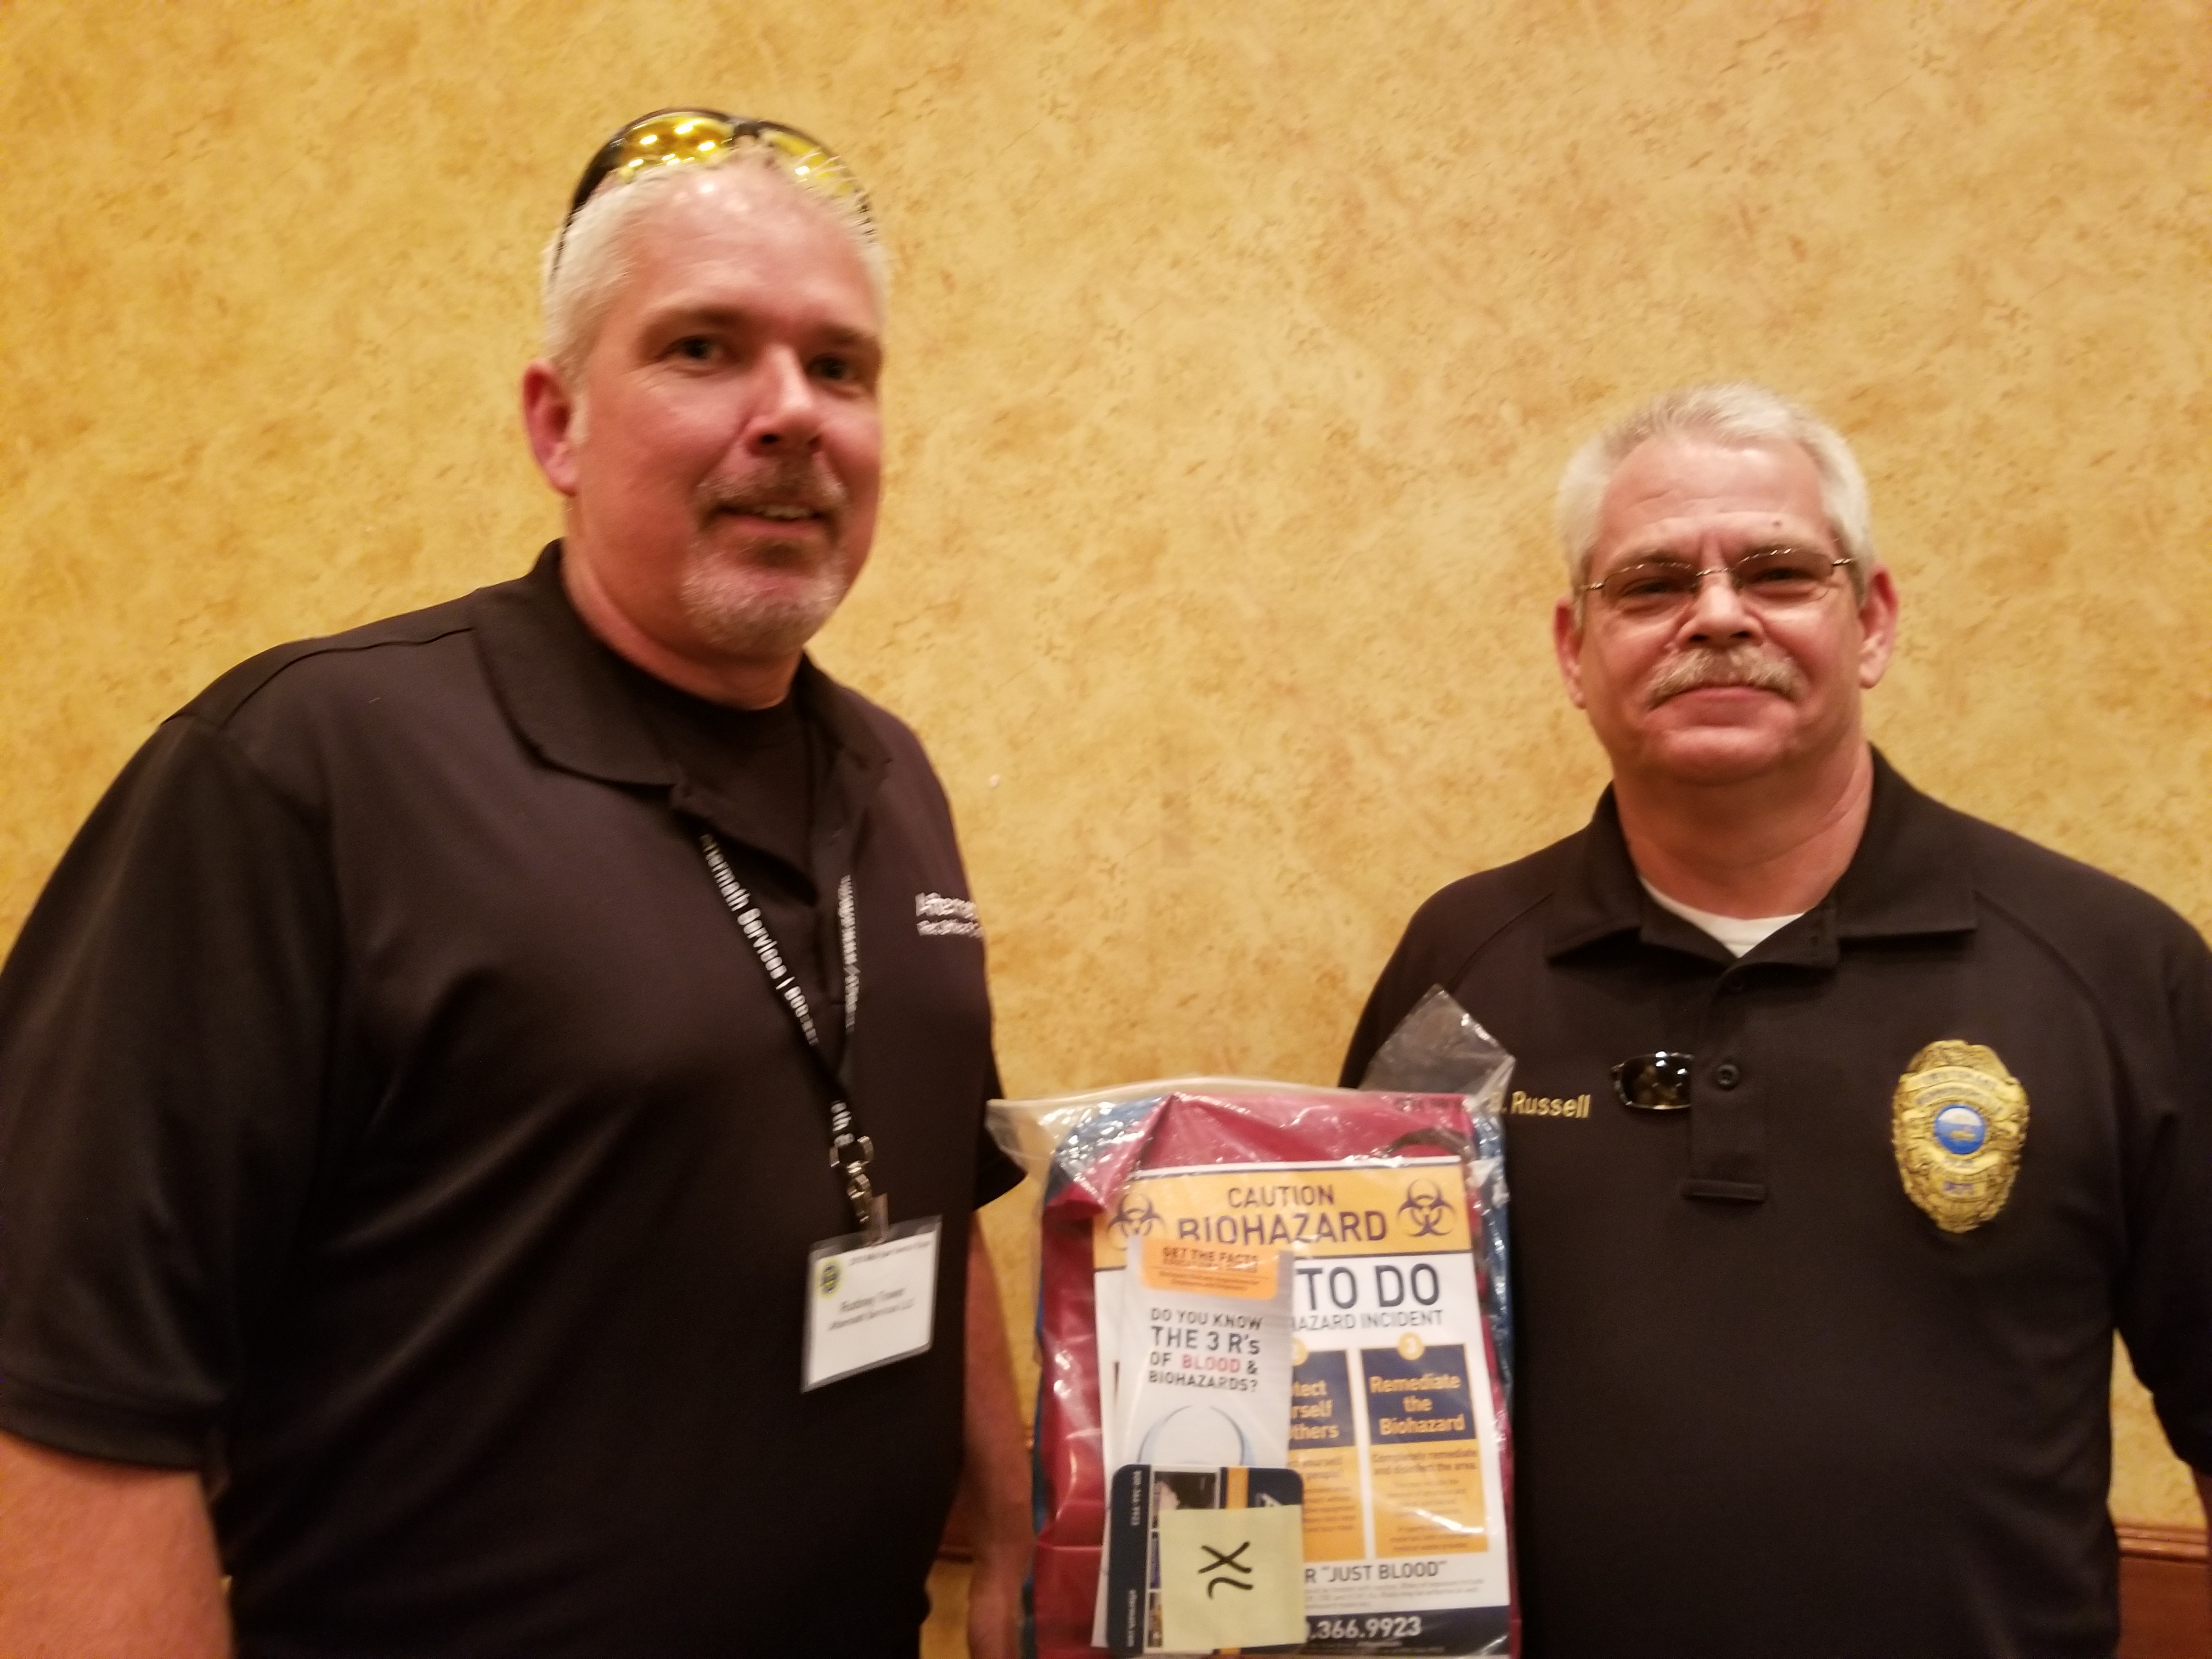 Tennessee Assoc. of Chiefs of Police with PPE Kit.